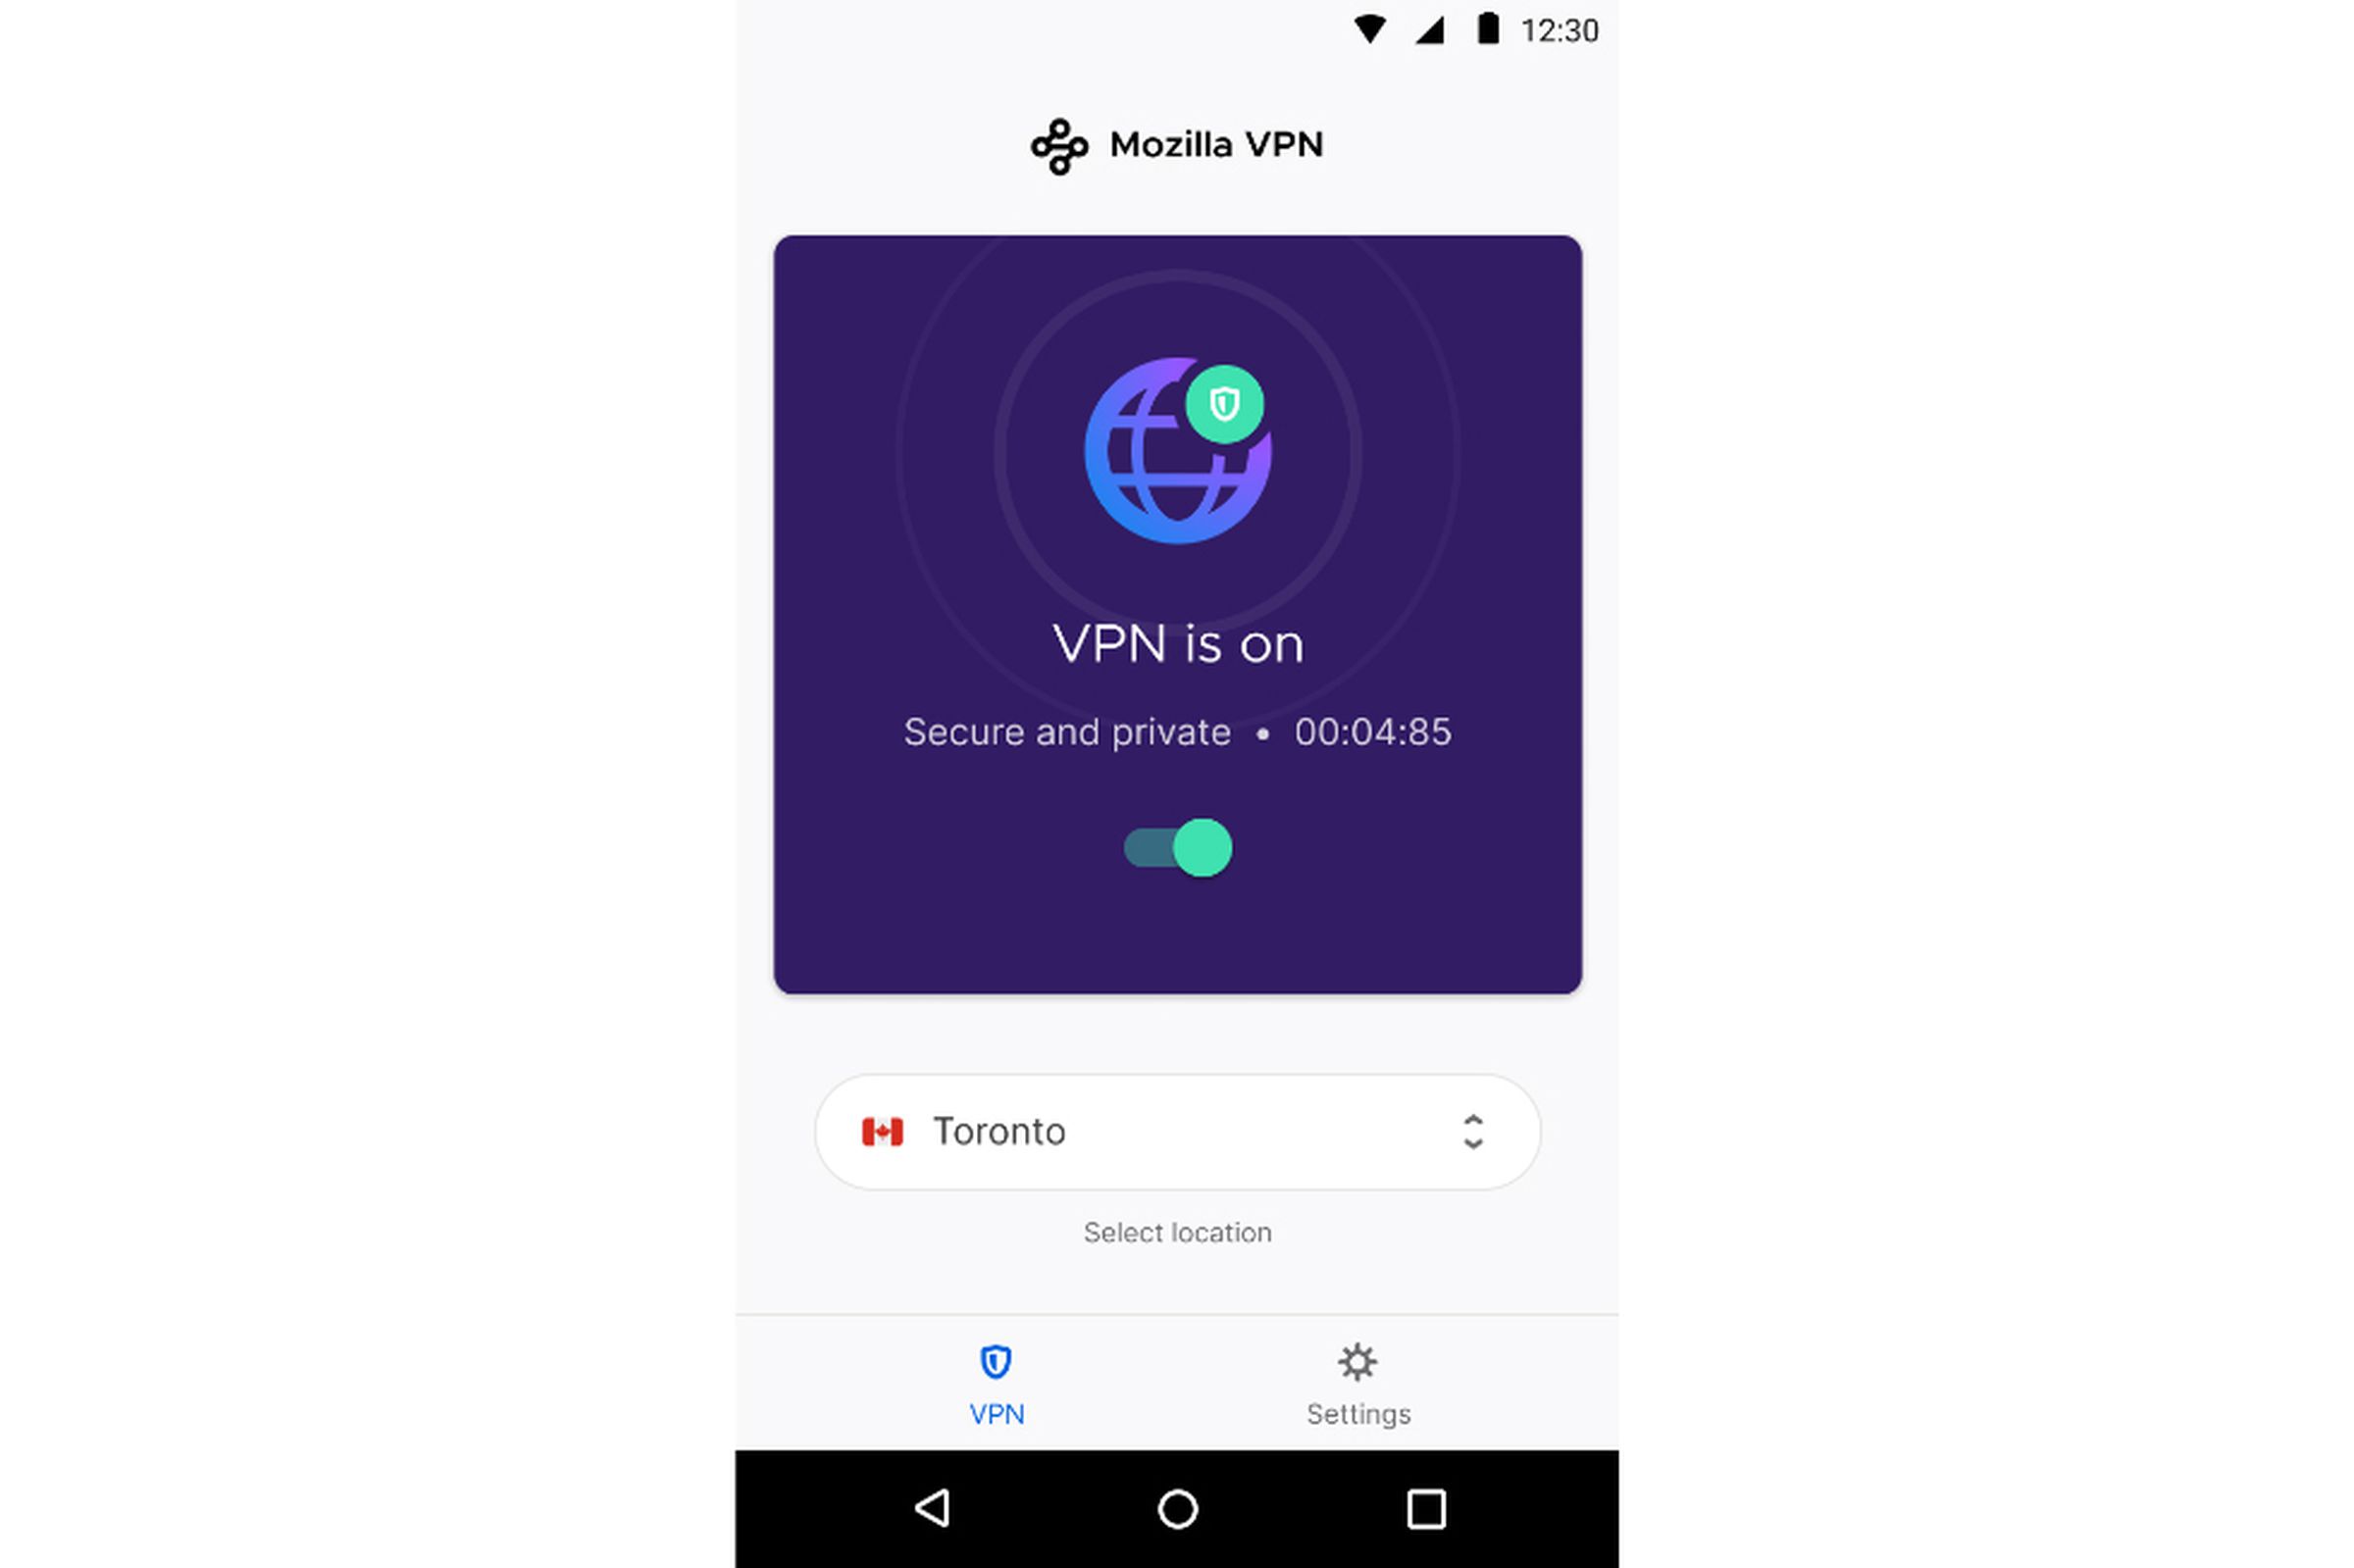 The app provides an on / off switch for the VPN.